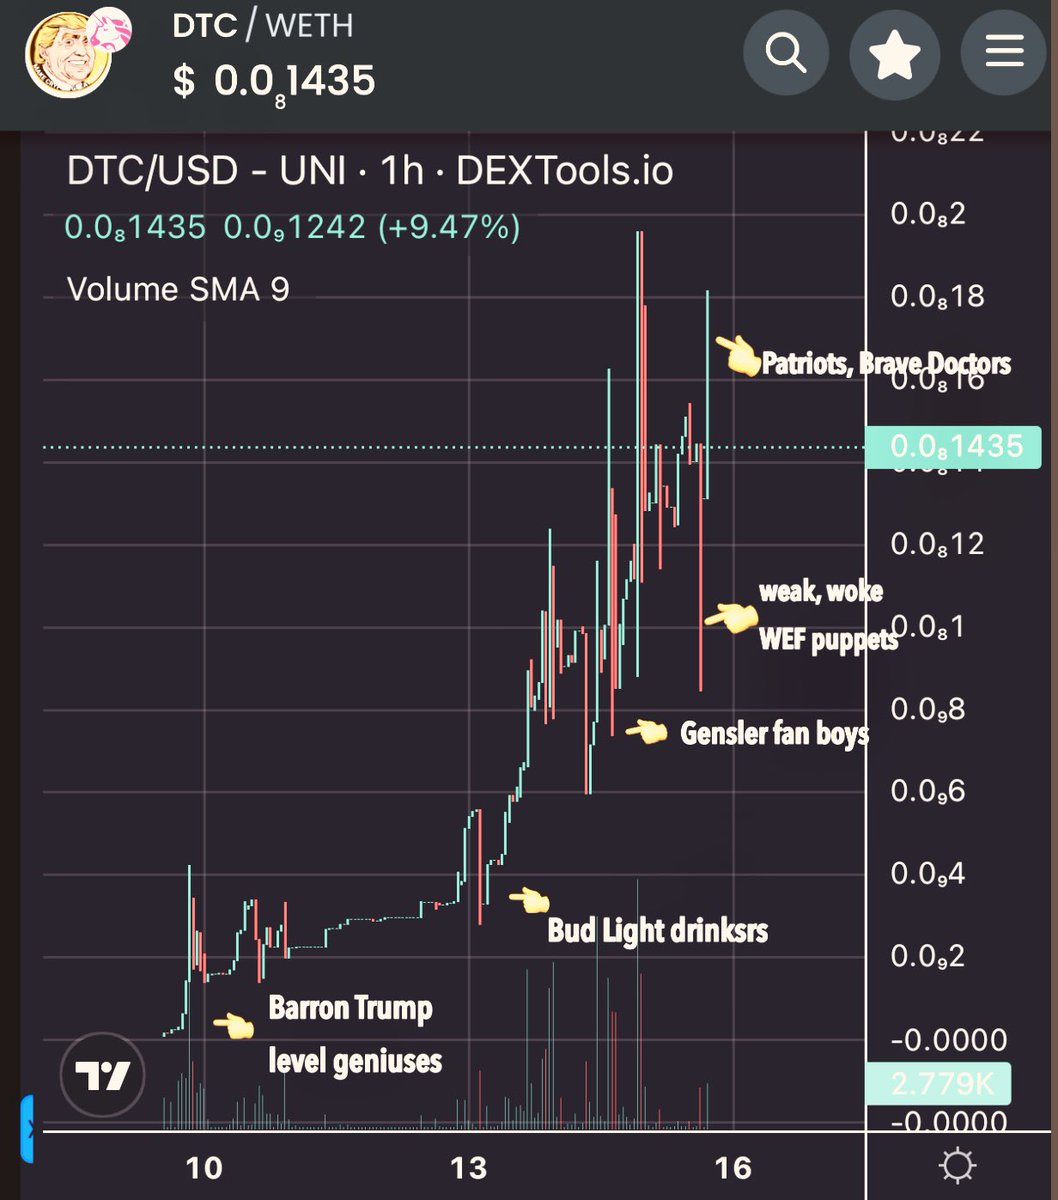 #DTC Chart Analysis: still bullish 💪🏼

 Maybe sell some #GME gains and spread it here. Not financial advice
——
  - basically weakhands are being 
     decimated
  - Where we go one we go all! Let’s go